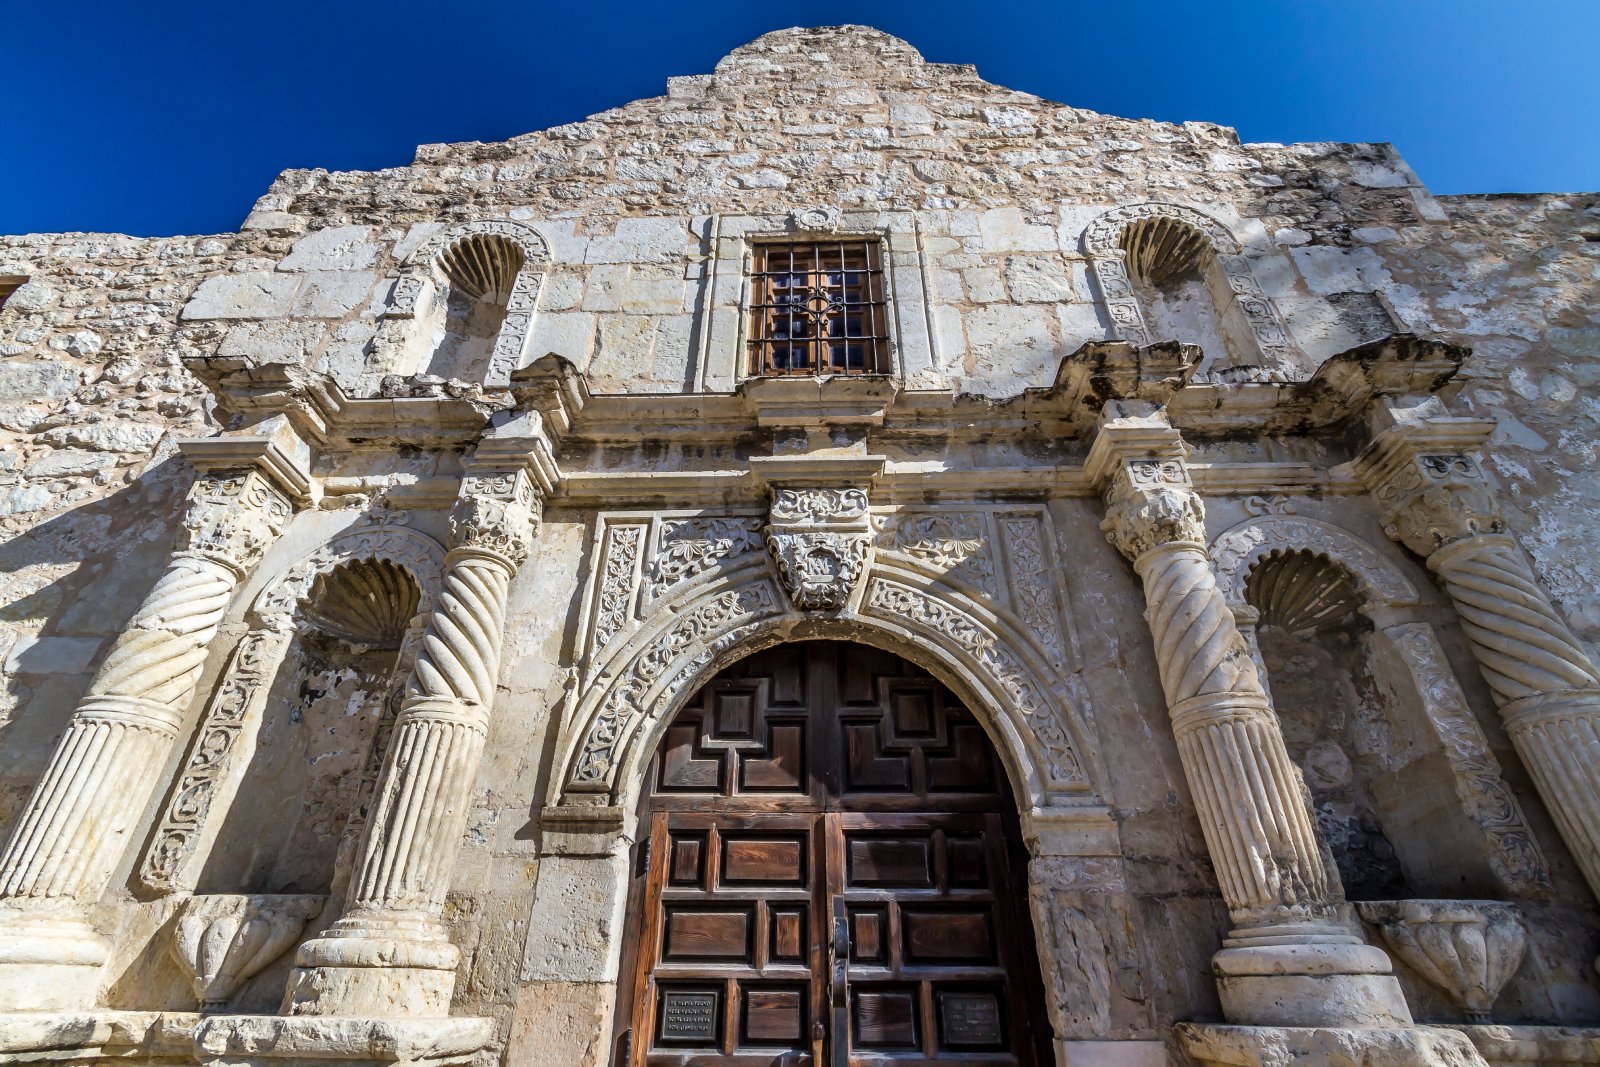 <p>Texas sees tourism revenues of approximately $80 billion, driven by its diverse cultural and historical attractions. A visit to the Alamo is free, but surrounding attractions and events can add to the travel expenses.</p>